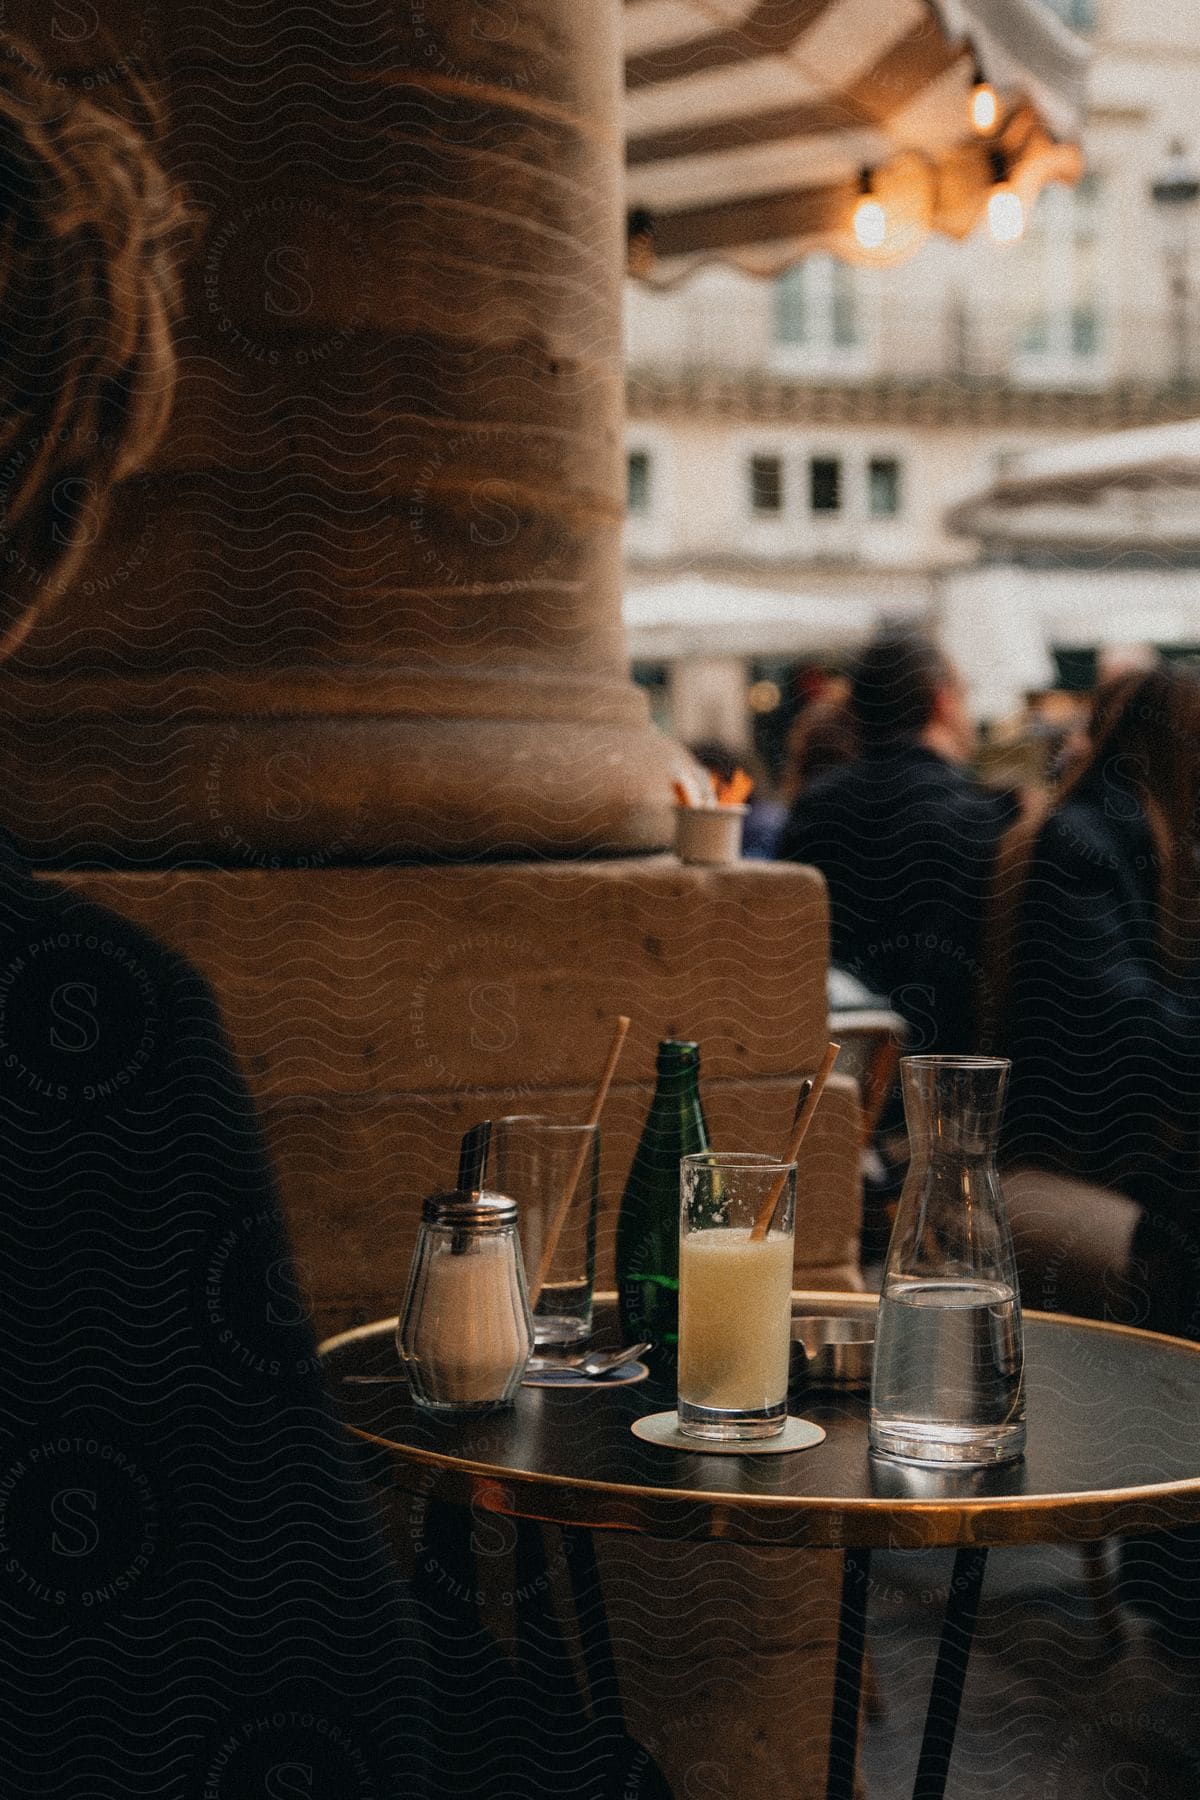 Outdoor Café Table With A Glass Of Juice, A Bottle Of Water, And A Sugar Dispenser In Front Of A Stone Pillar, With Blurred People In The Background